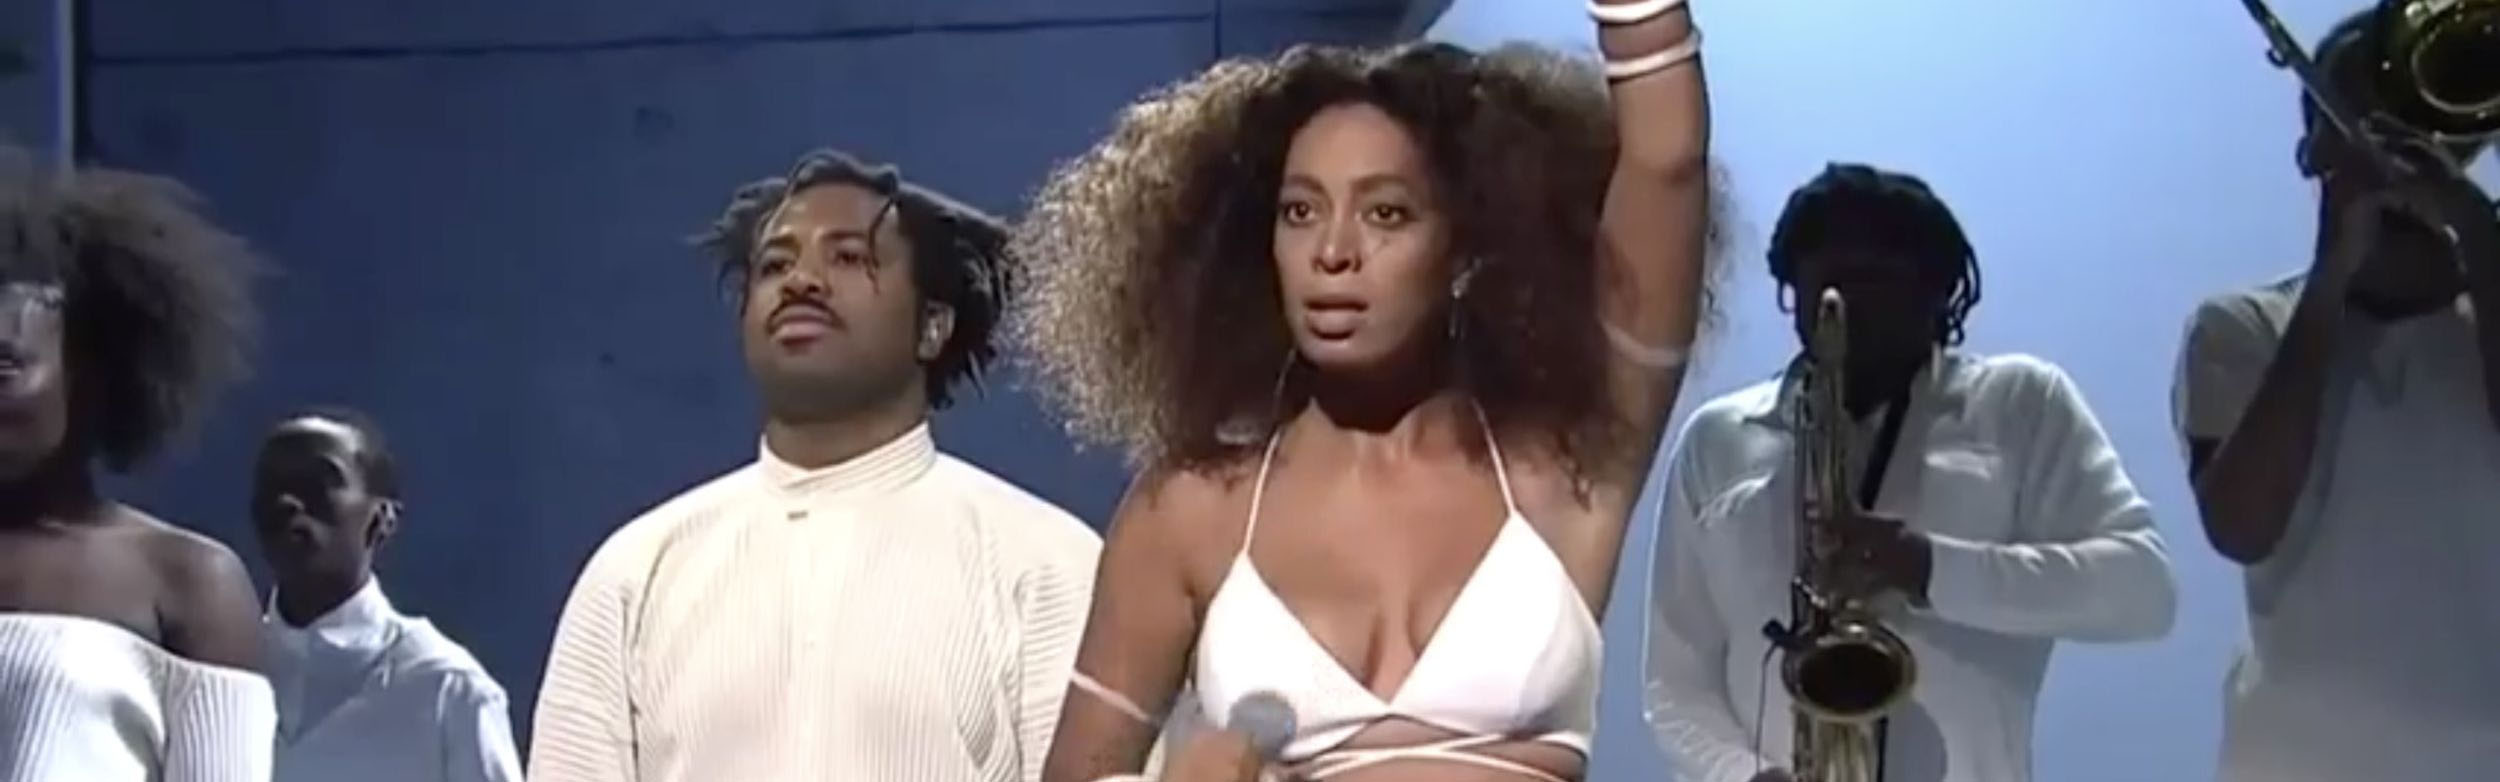 solange-snl-saturday-night-live-sampha-dont-touch-my-hair